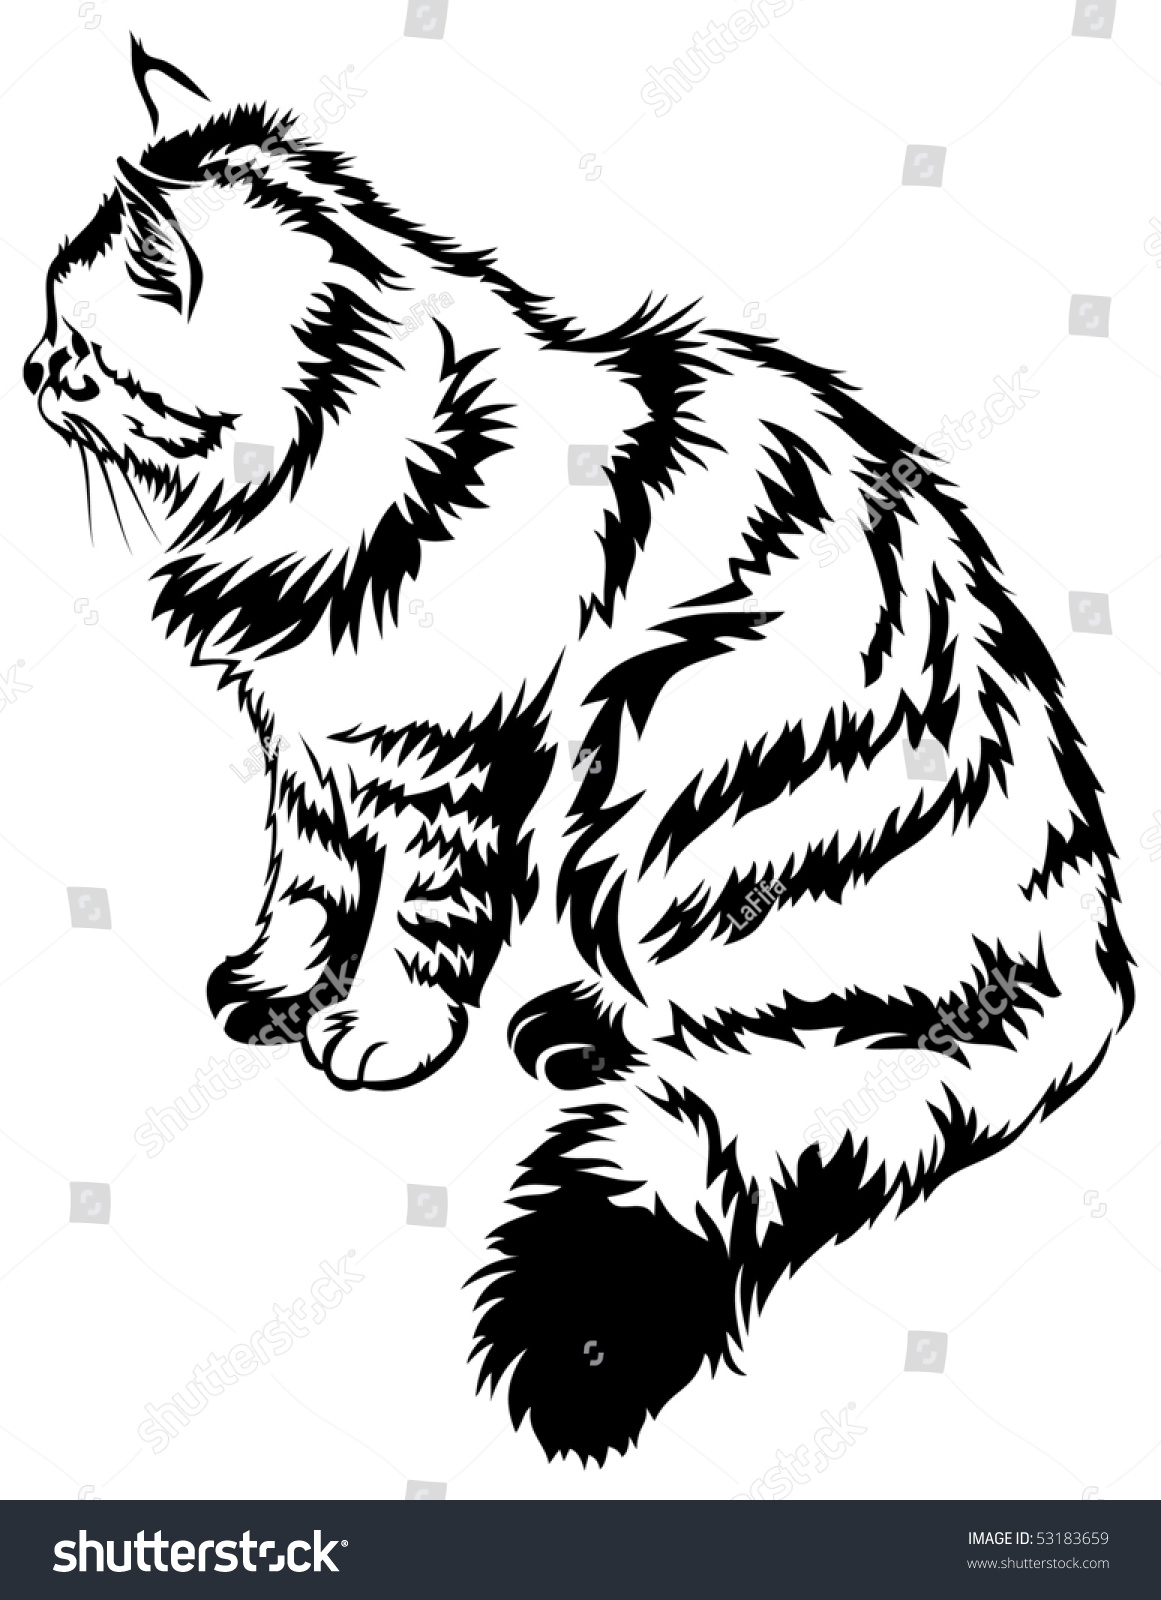 Contour Image Of Striped Cat Stock Vector Illustration 53183659